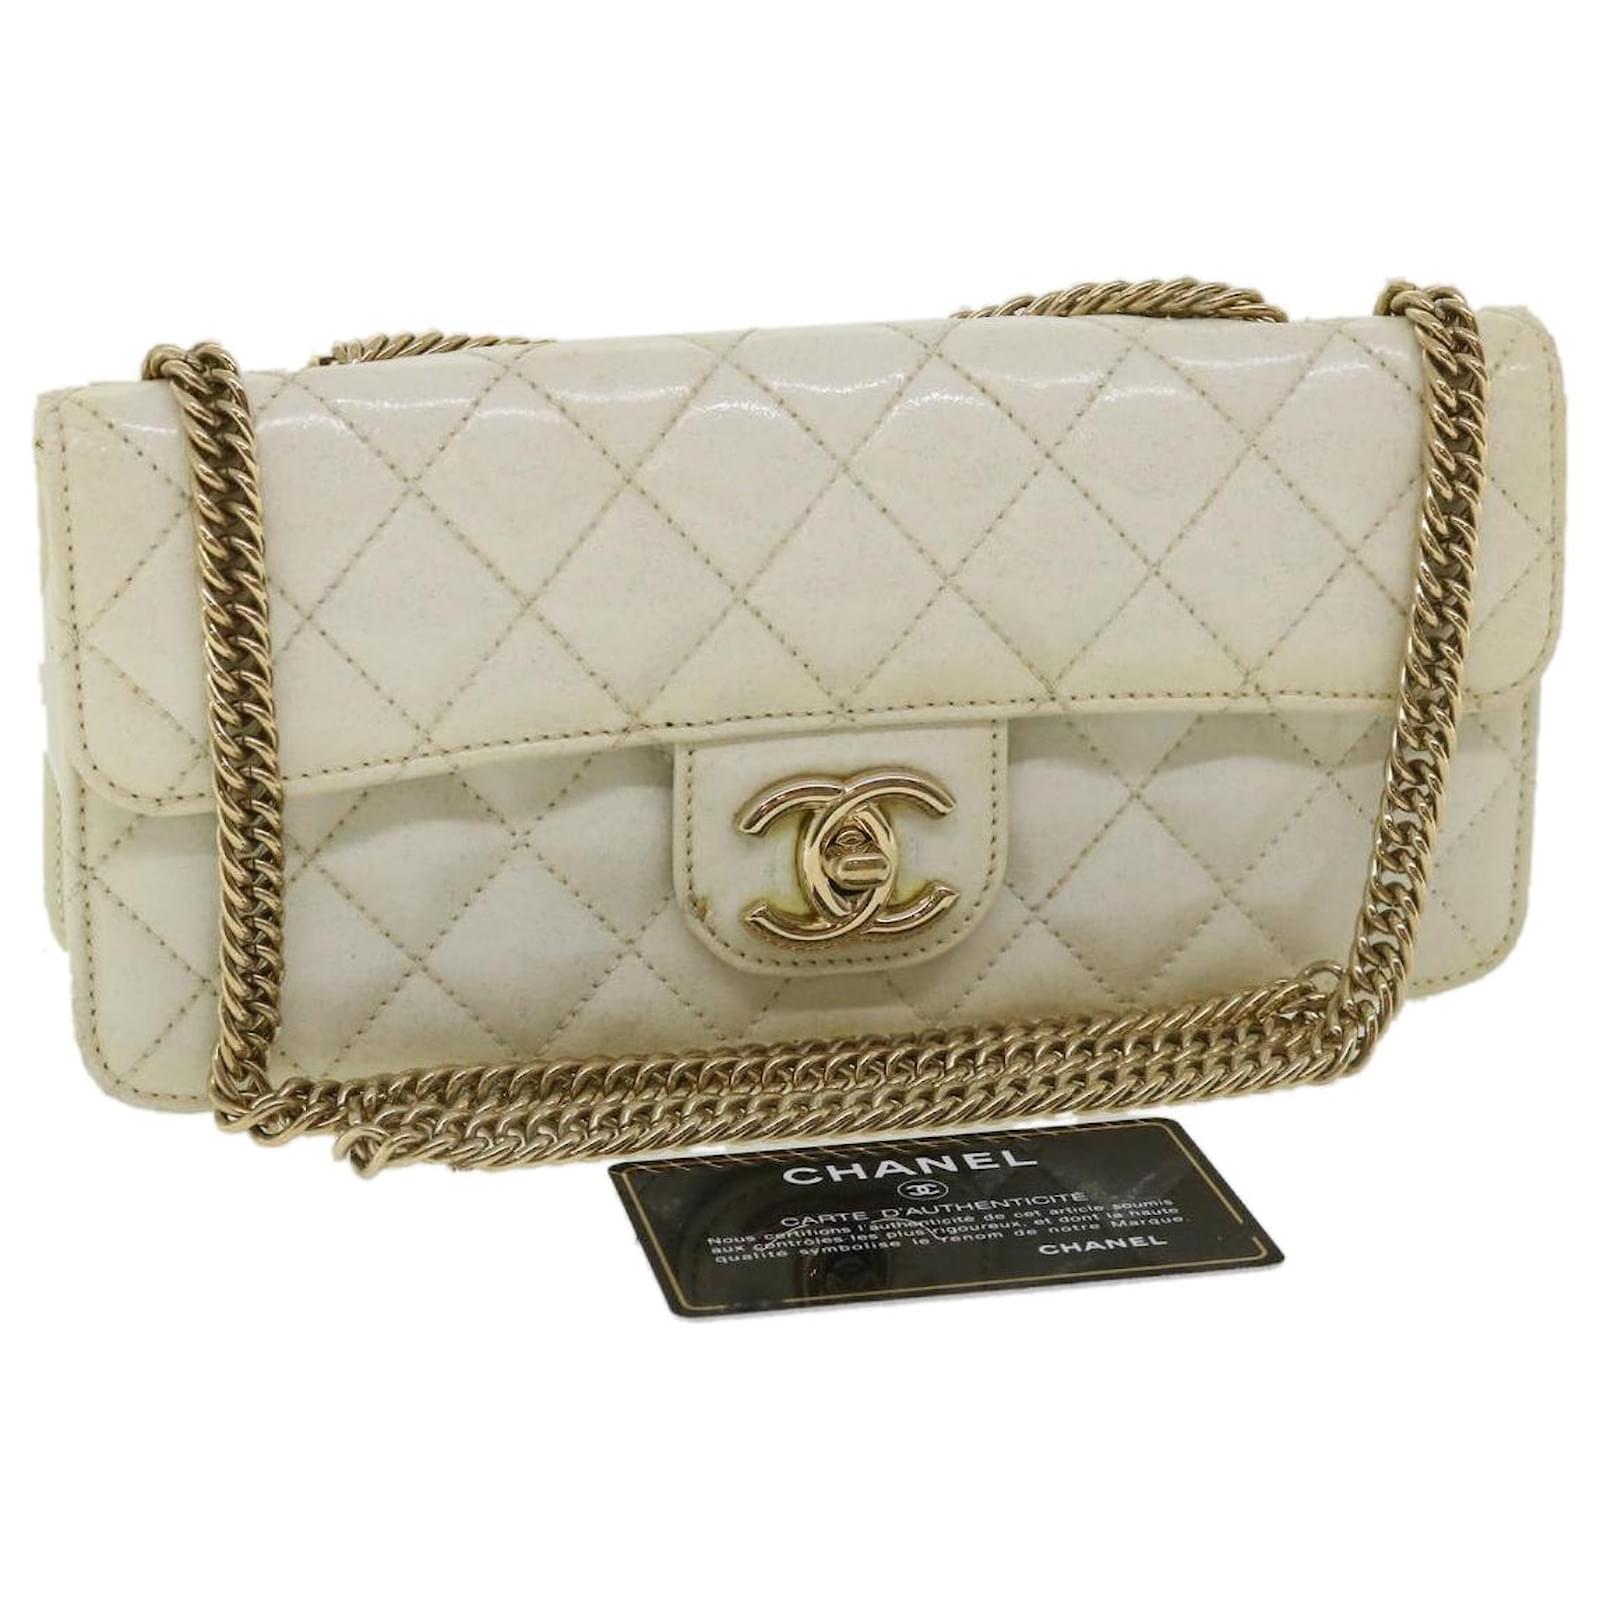 Chanel White Quilted Patent Leather Classic Shoulder Bag Chanel